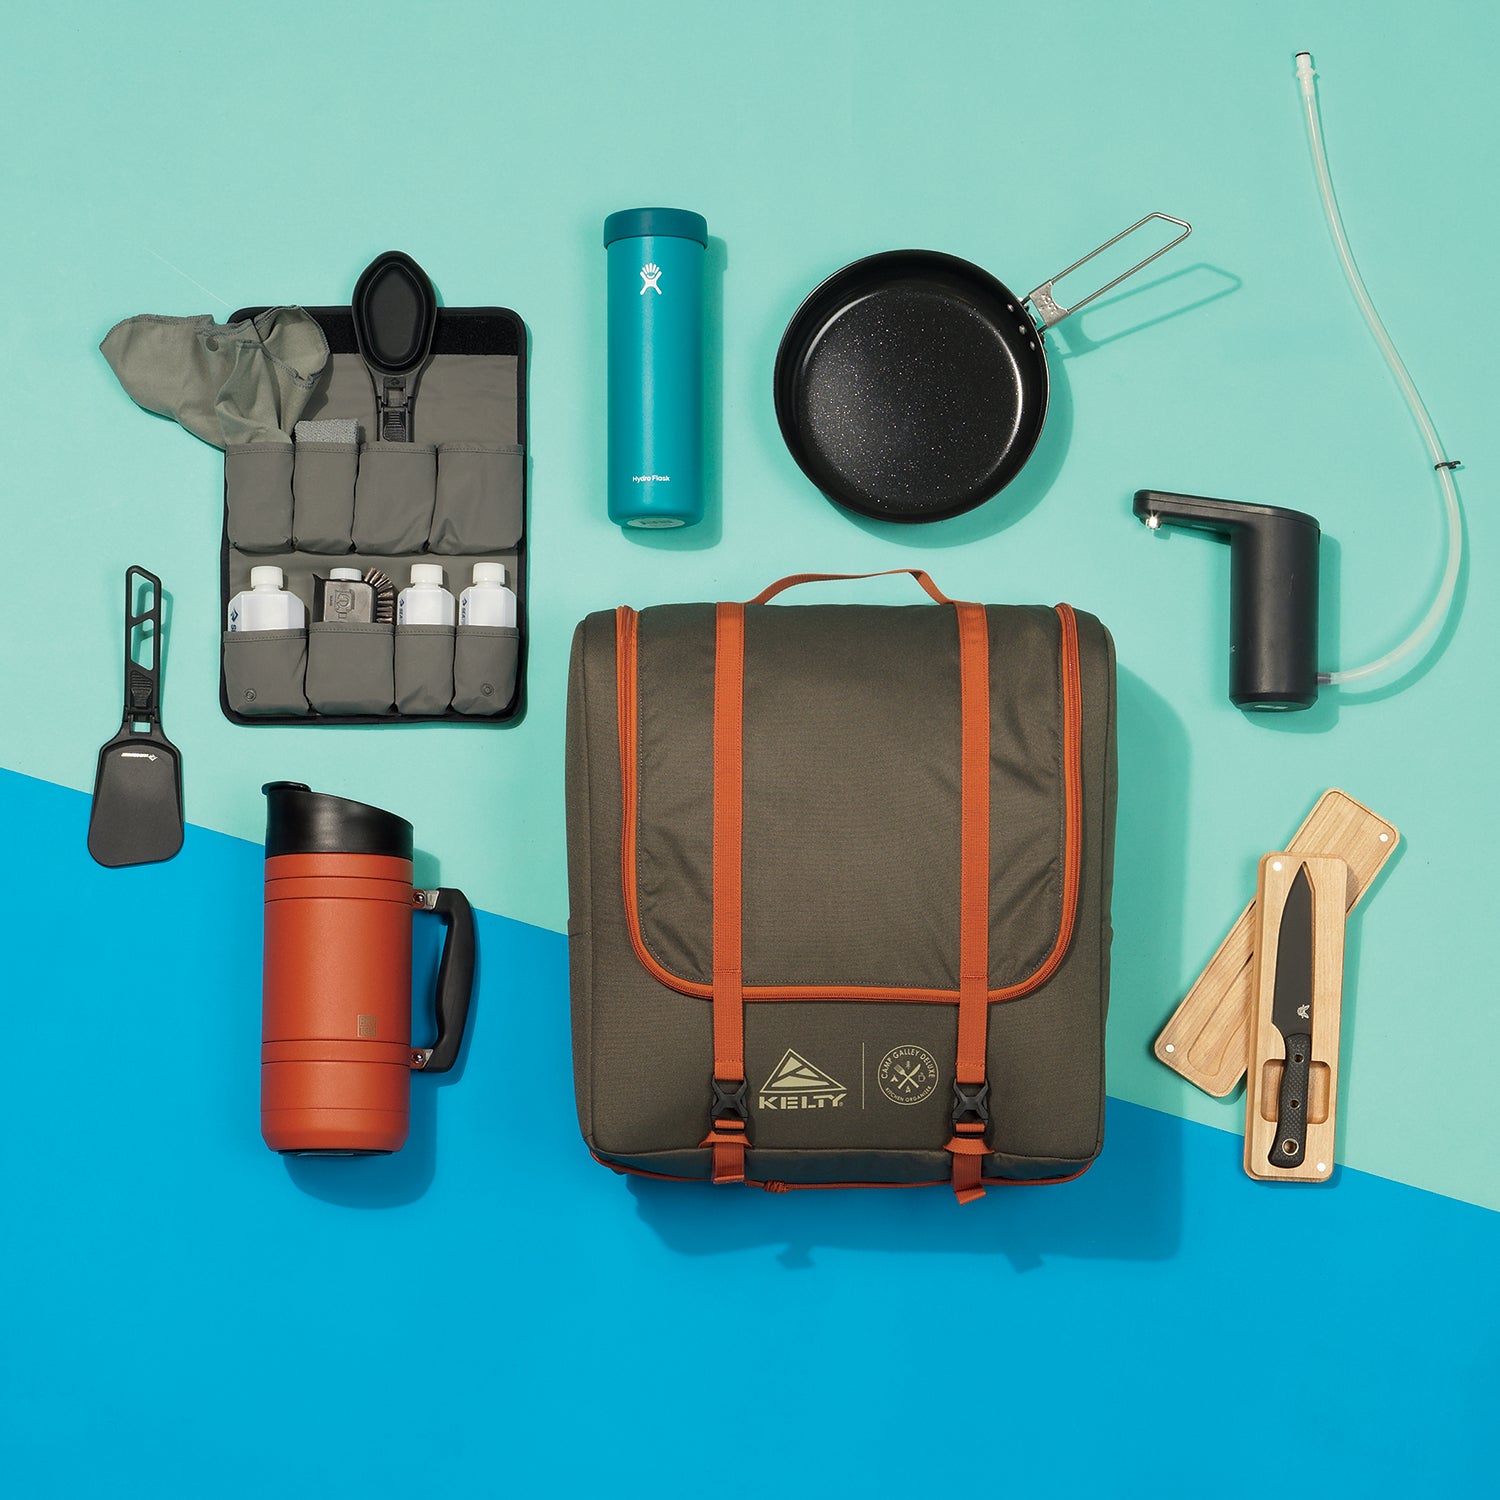 Set Of Travel Equipment. Accessories For Camping And Camps